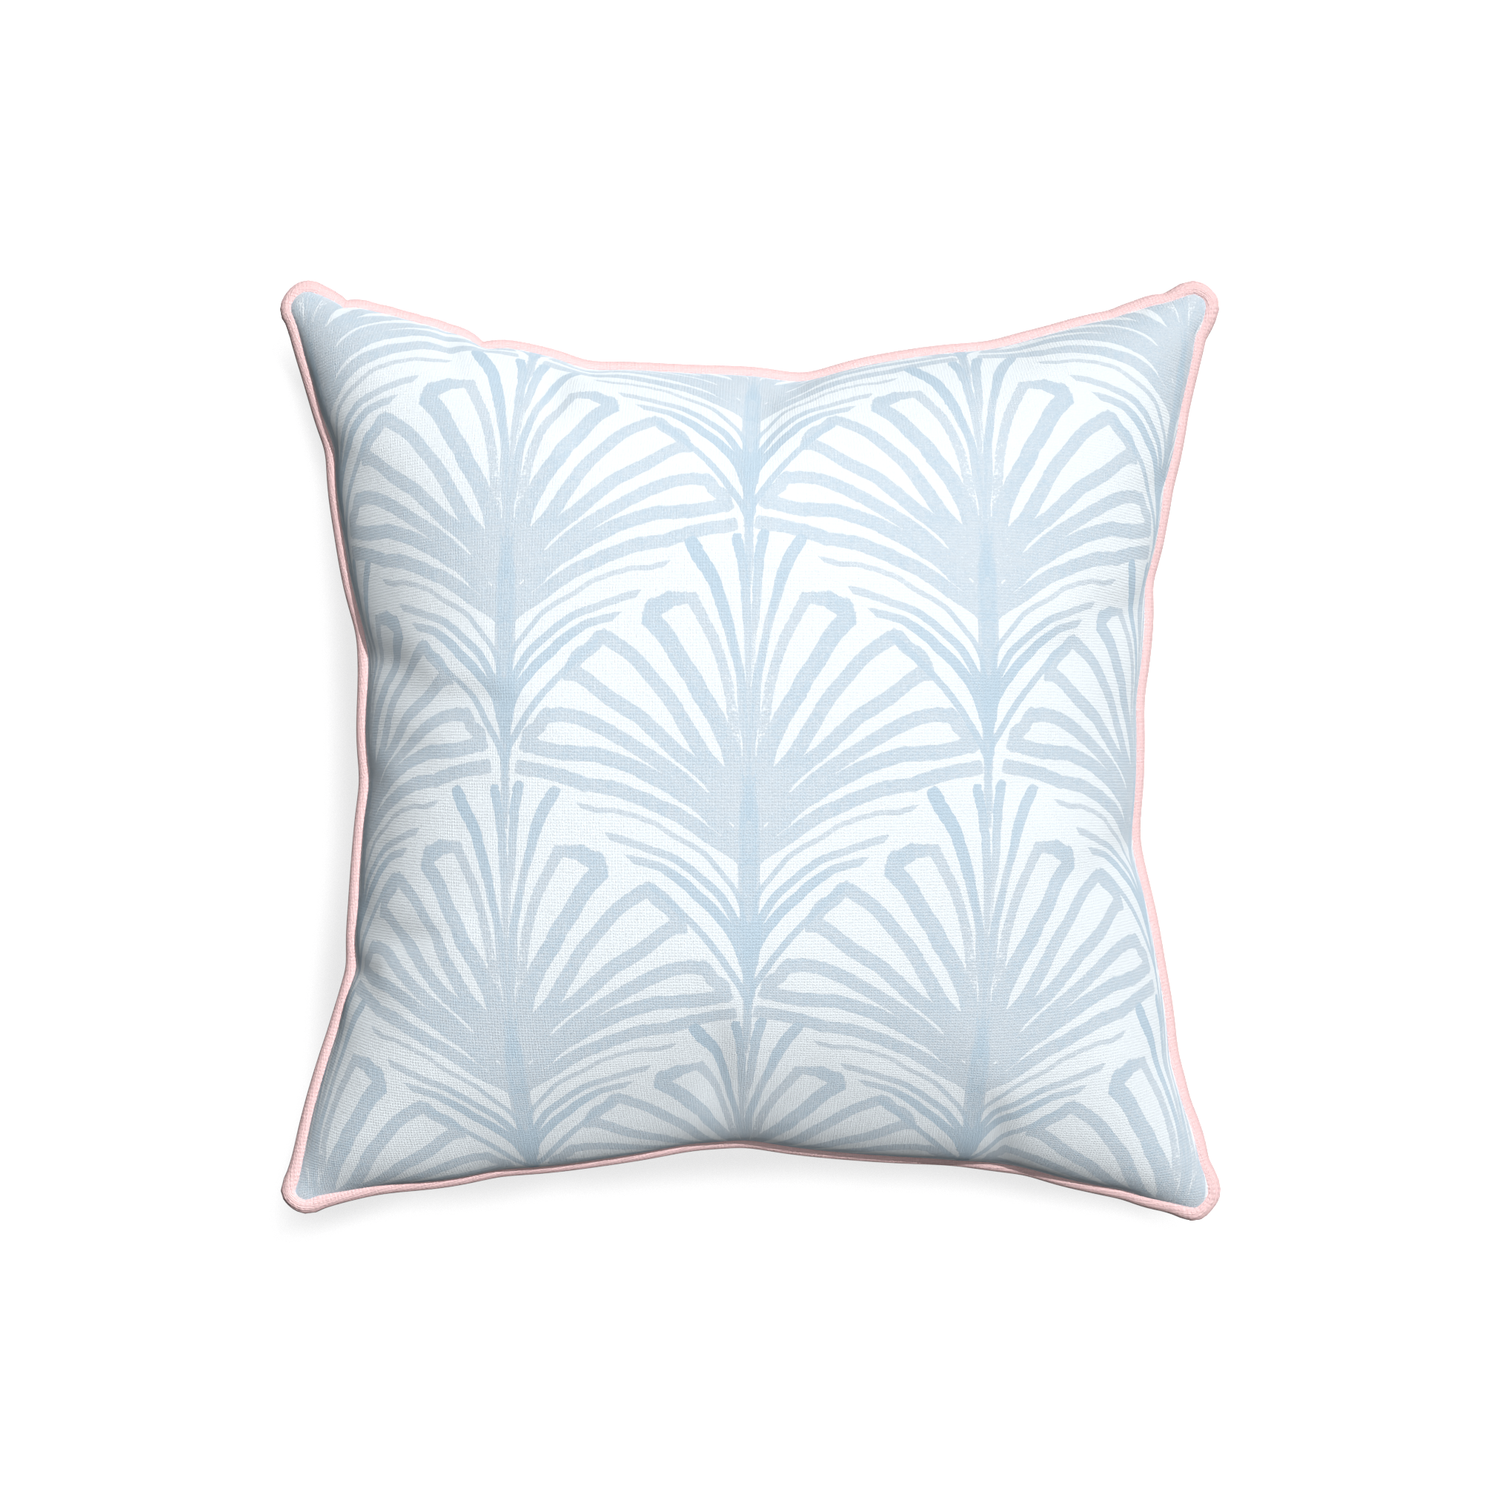 20-square suzy sky custom pillow with petal piping on white background